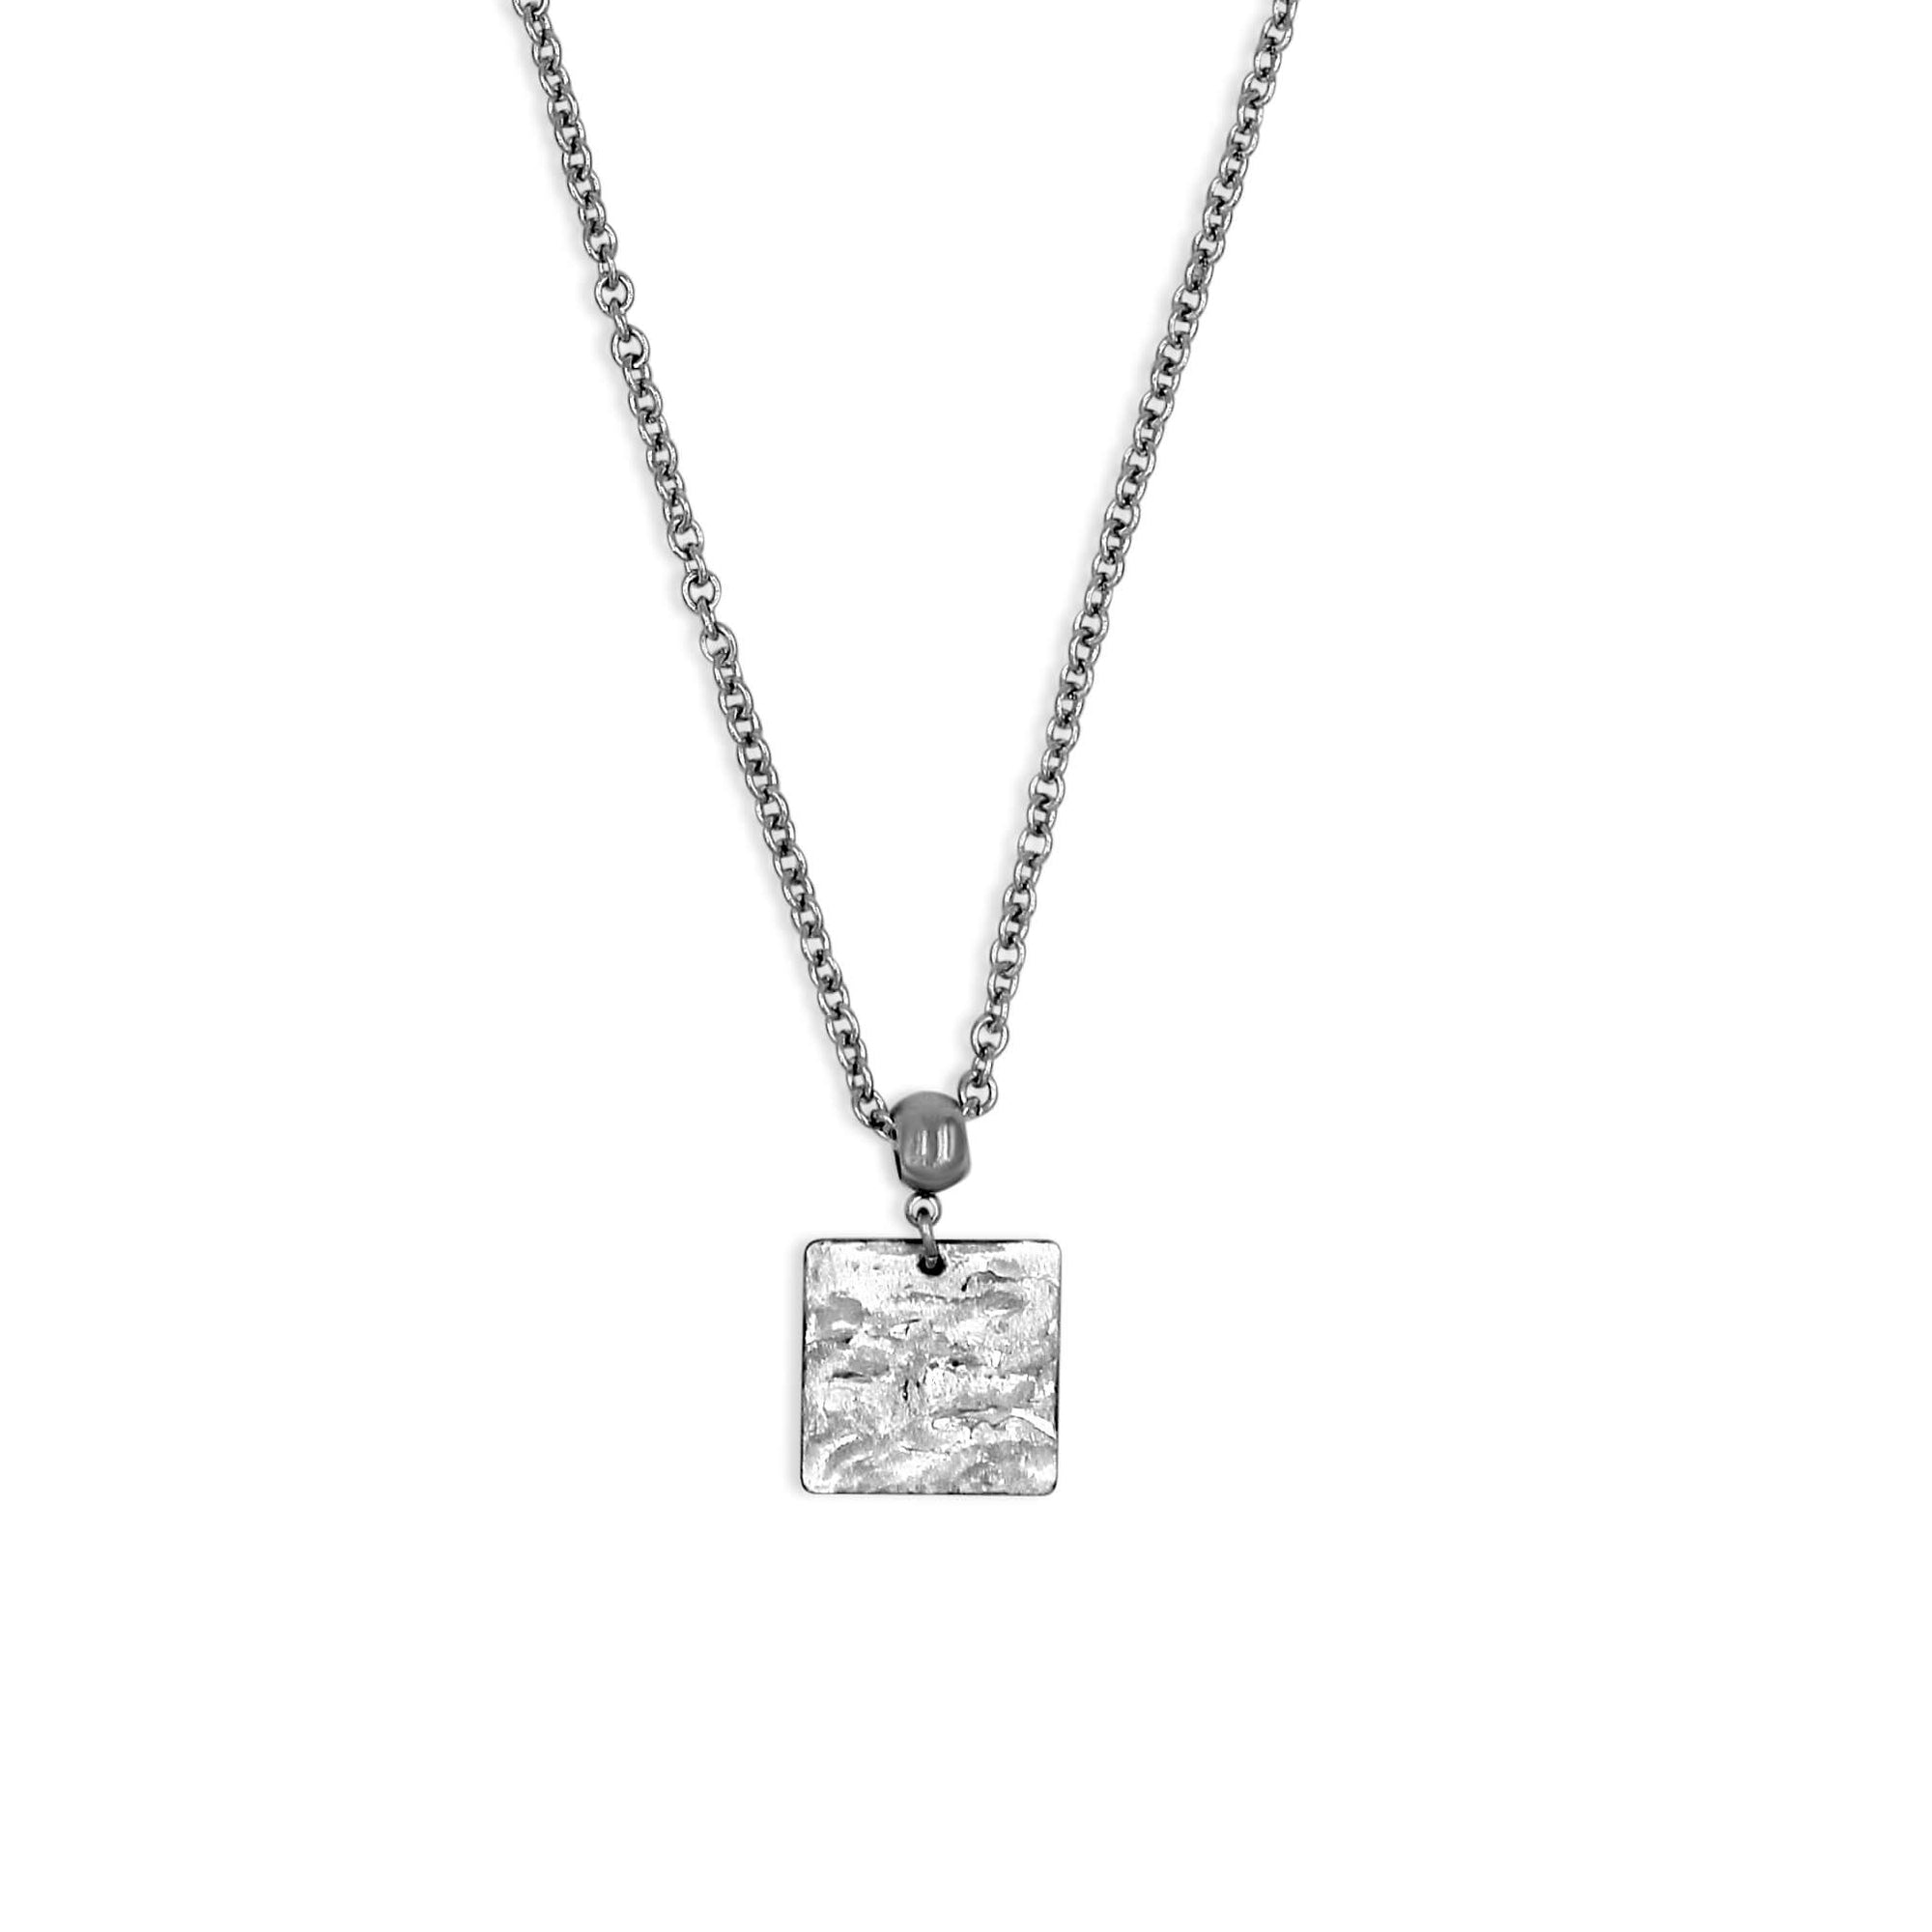 Silver Square Pendant Necklace - Creative Jewelry by Marcia - Asymmetrical Jewelry - Timeless Jewelry